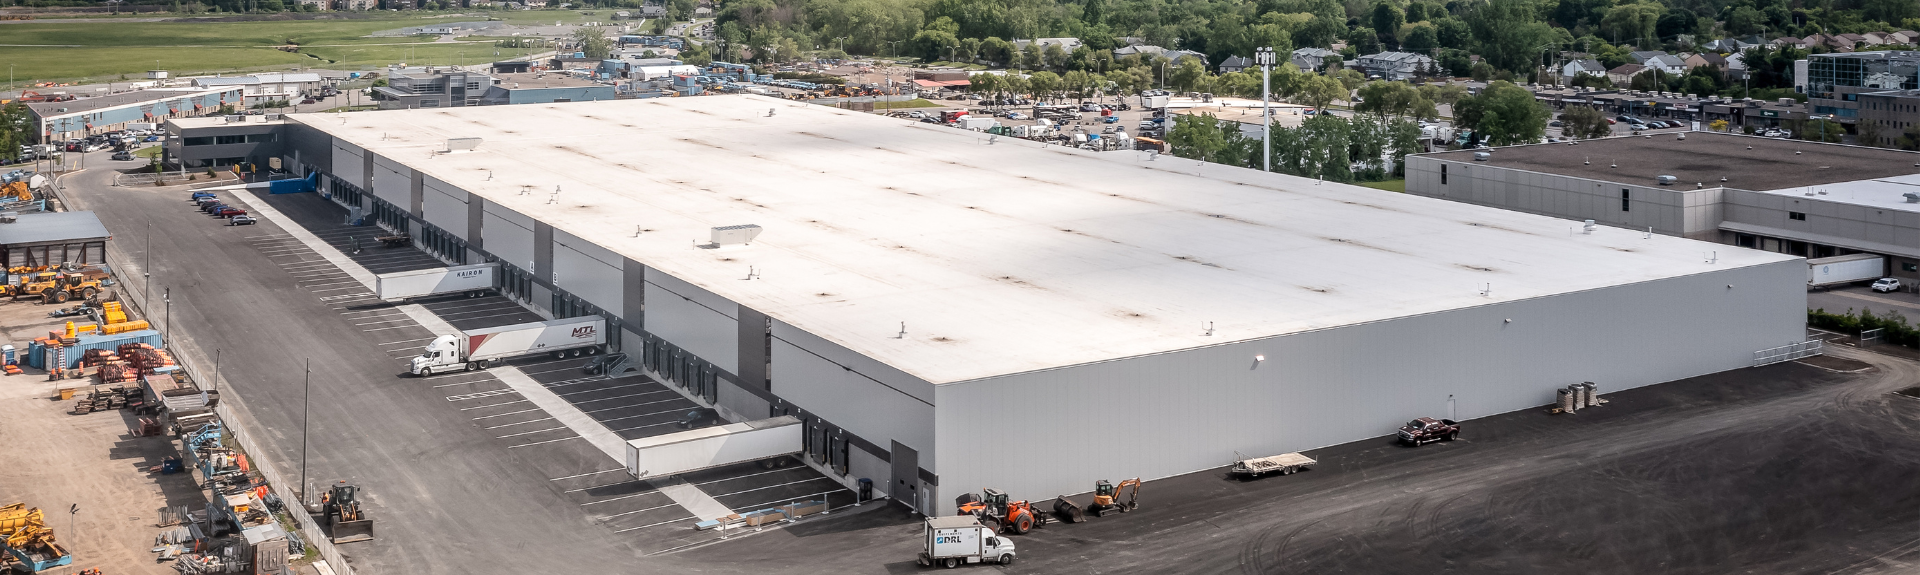 Skyline Industrial REIT Announces Distribution Rate Increase